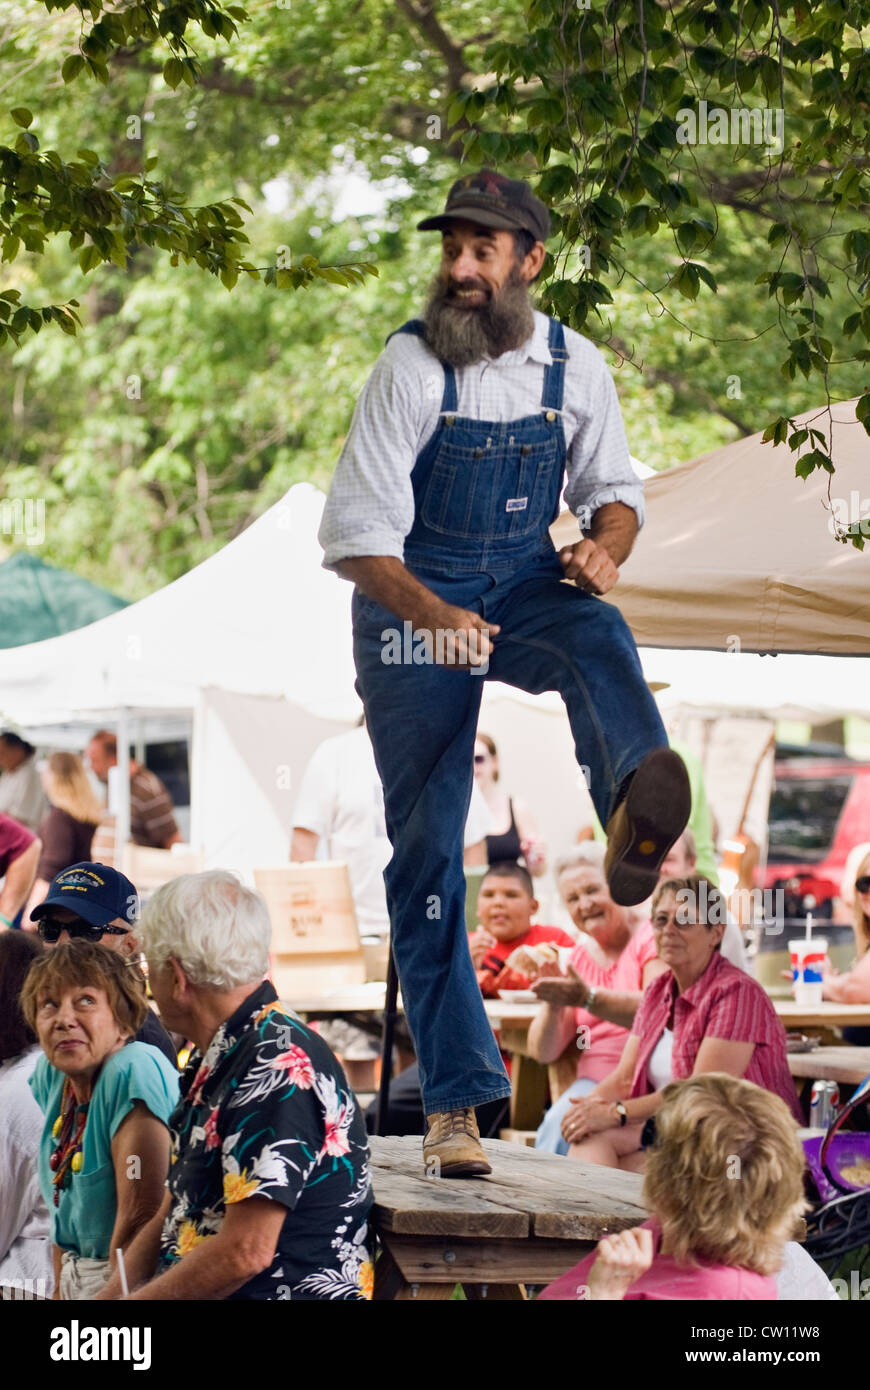 Man in Bib Overalls Dancing a Jig on a Picnic Table Amid Crowd at the  Kentucky Music Festival at Iroquois Park in Kentucky Stock Photo - Alamy